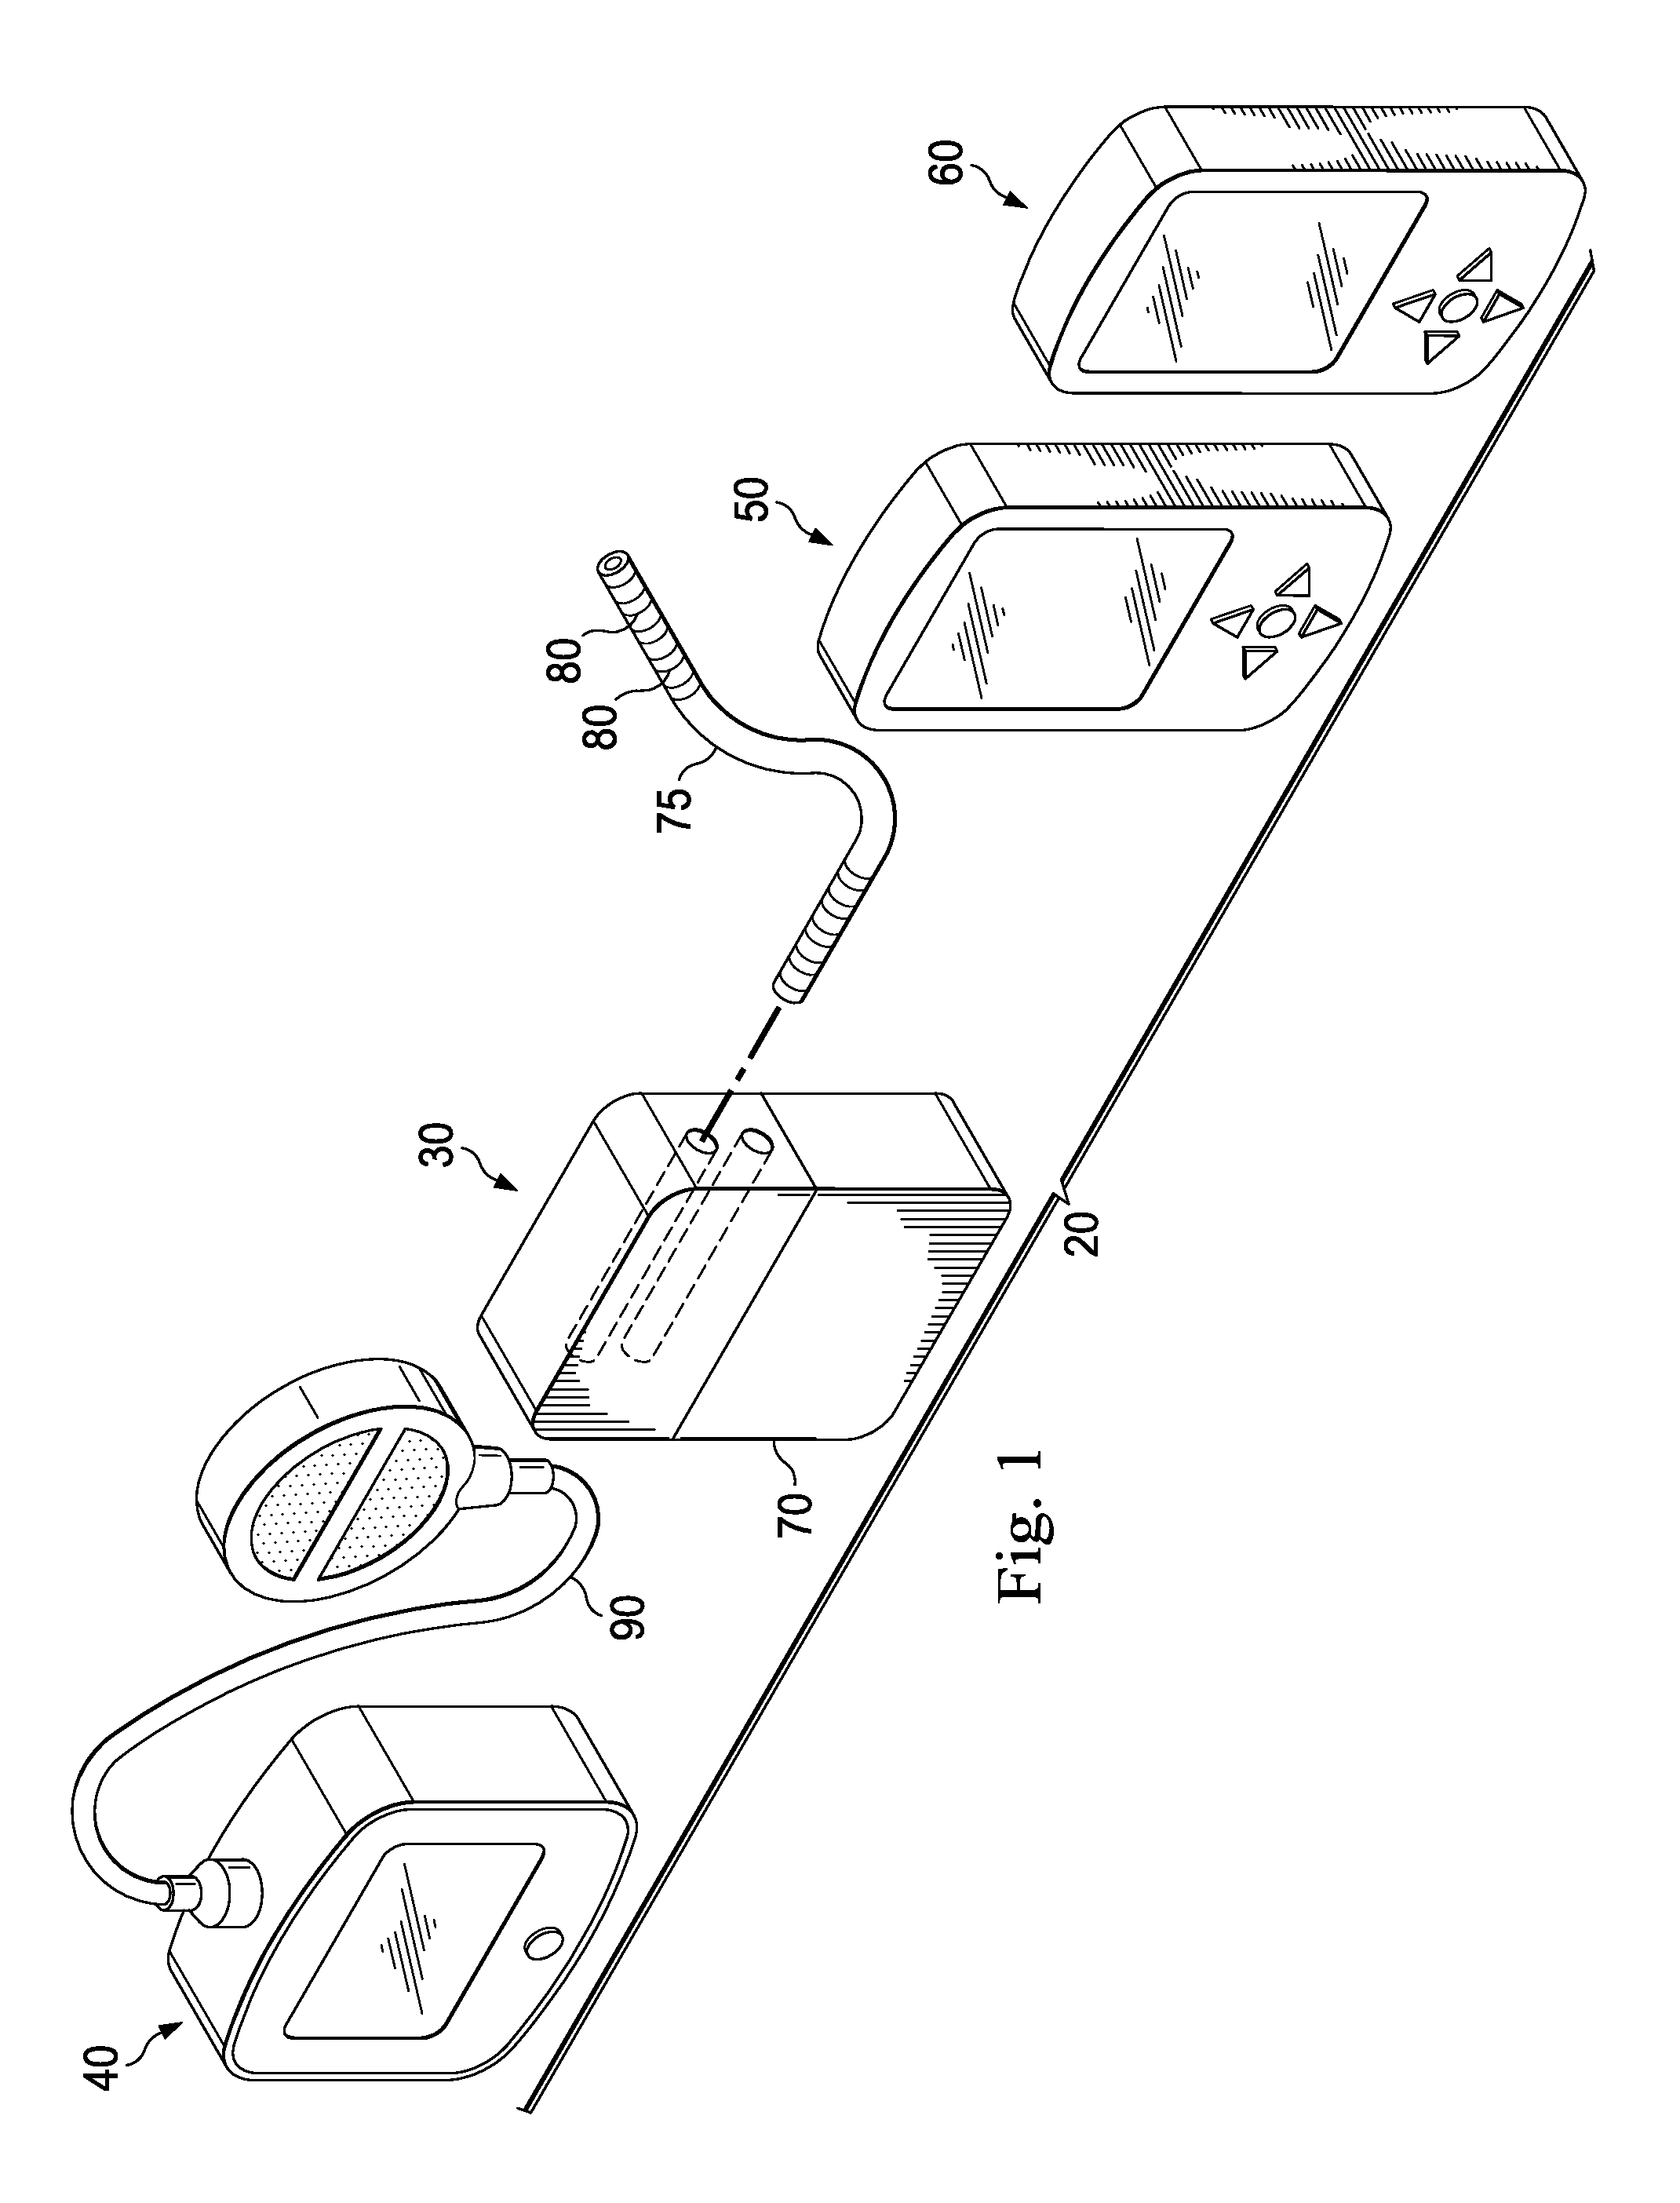 Method and system of quick neurostimulation electrode configuration and positioning